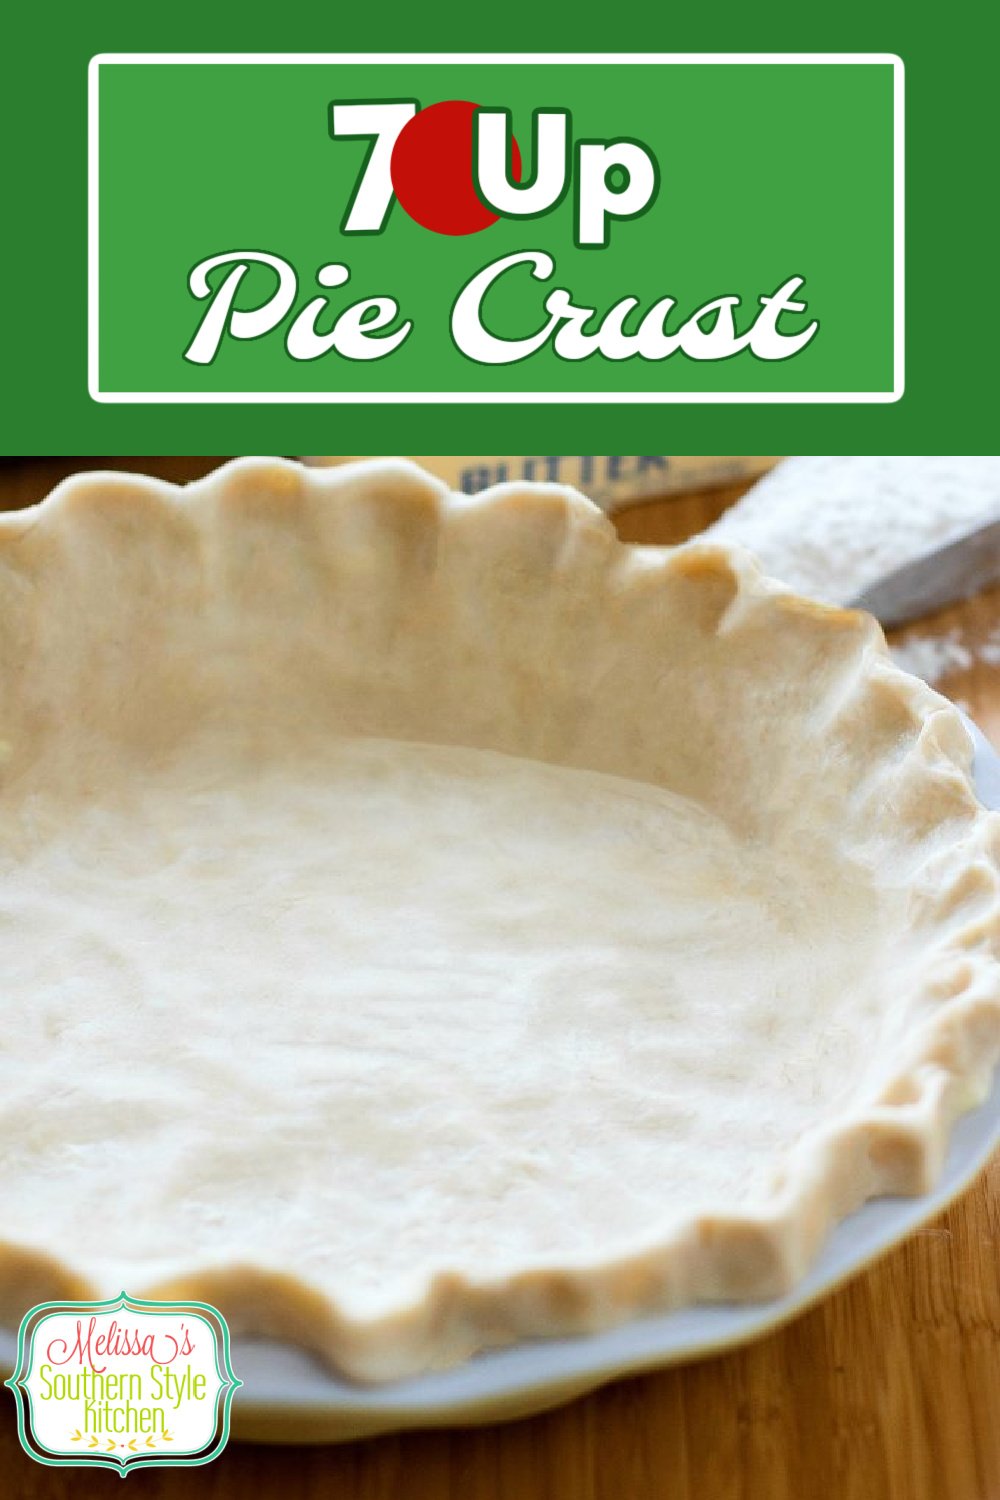 This light and flaky pie crust can be used for sweet and savory pies #7uppiecrust #piecrustrecipes #bestpiecrust #flakypiecrust #7Up #pierecipes #desserts #dessertfoodrecipes #holidaybaking #southernfood #southernrecipes via @melissasssk